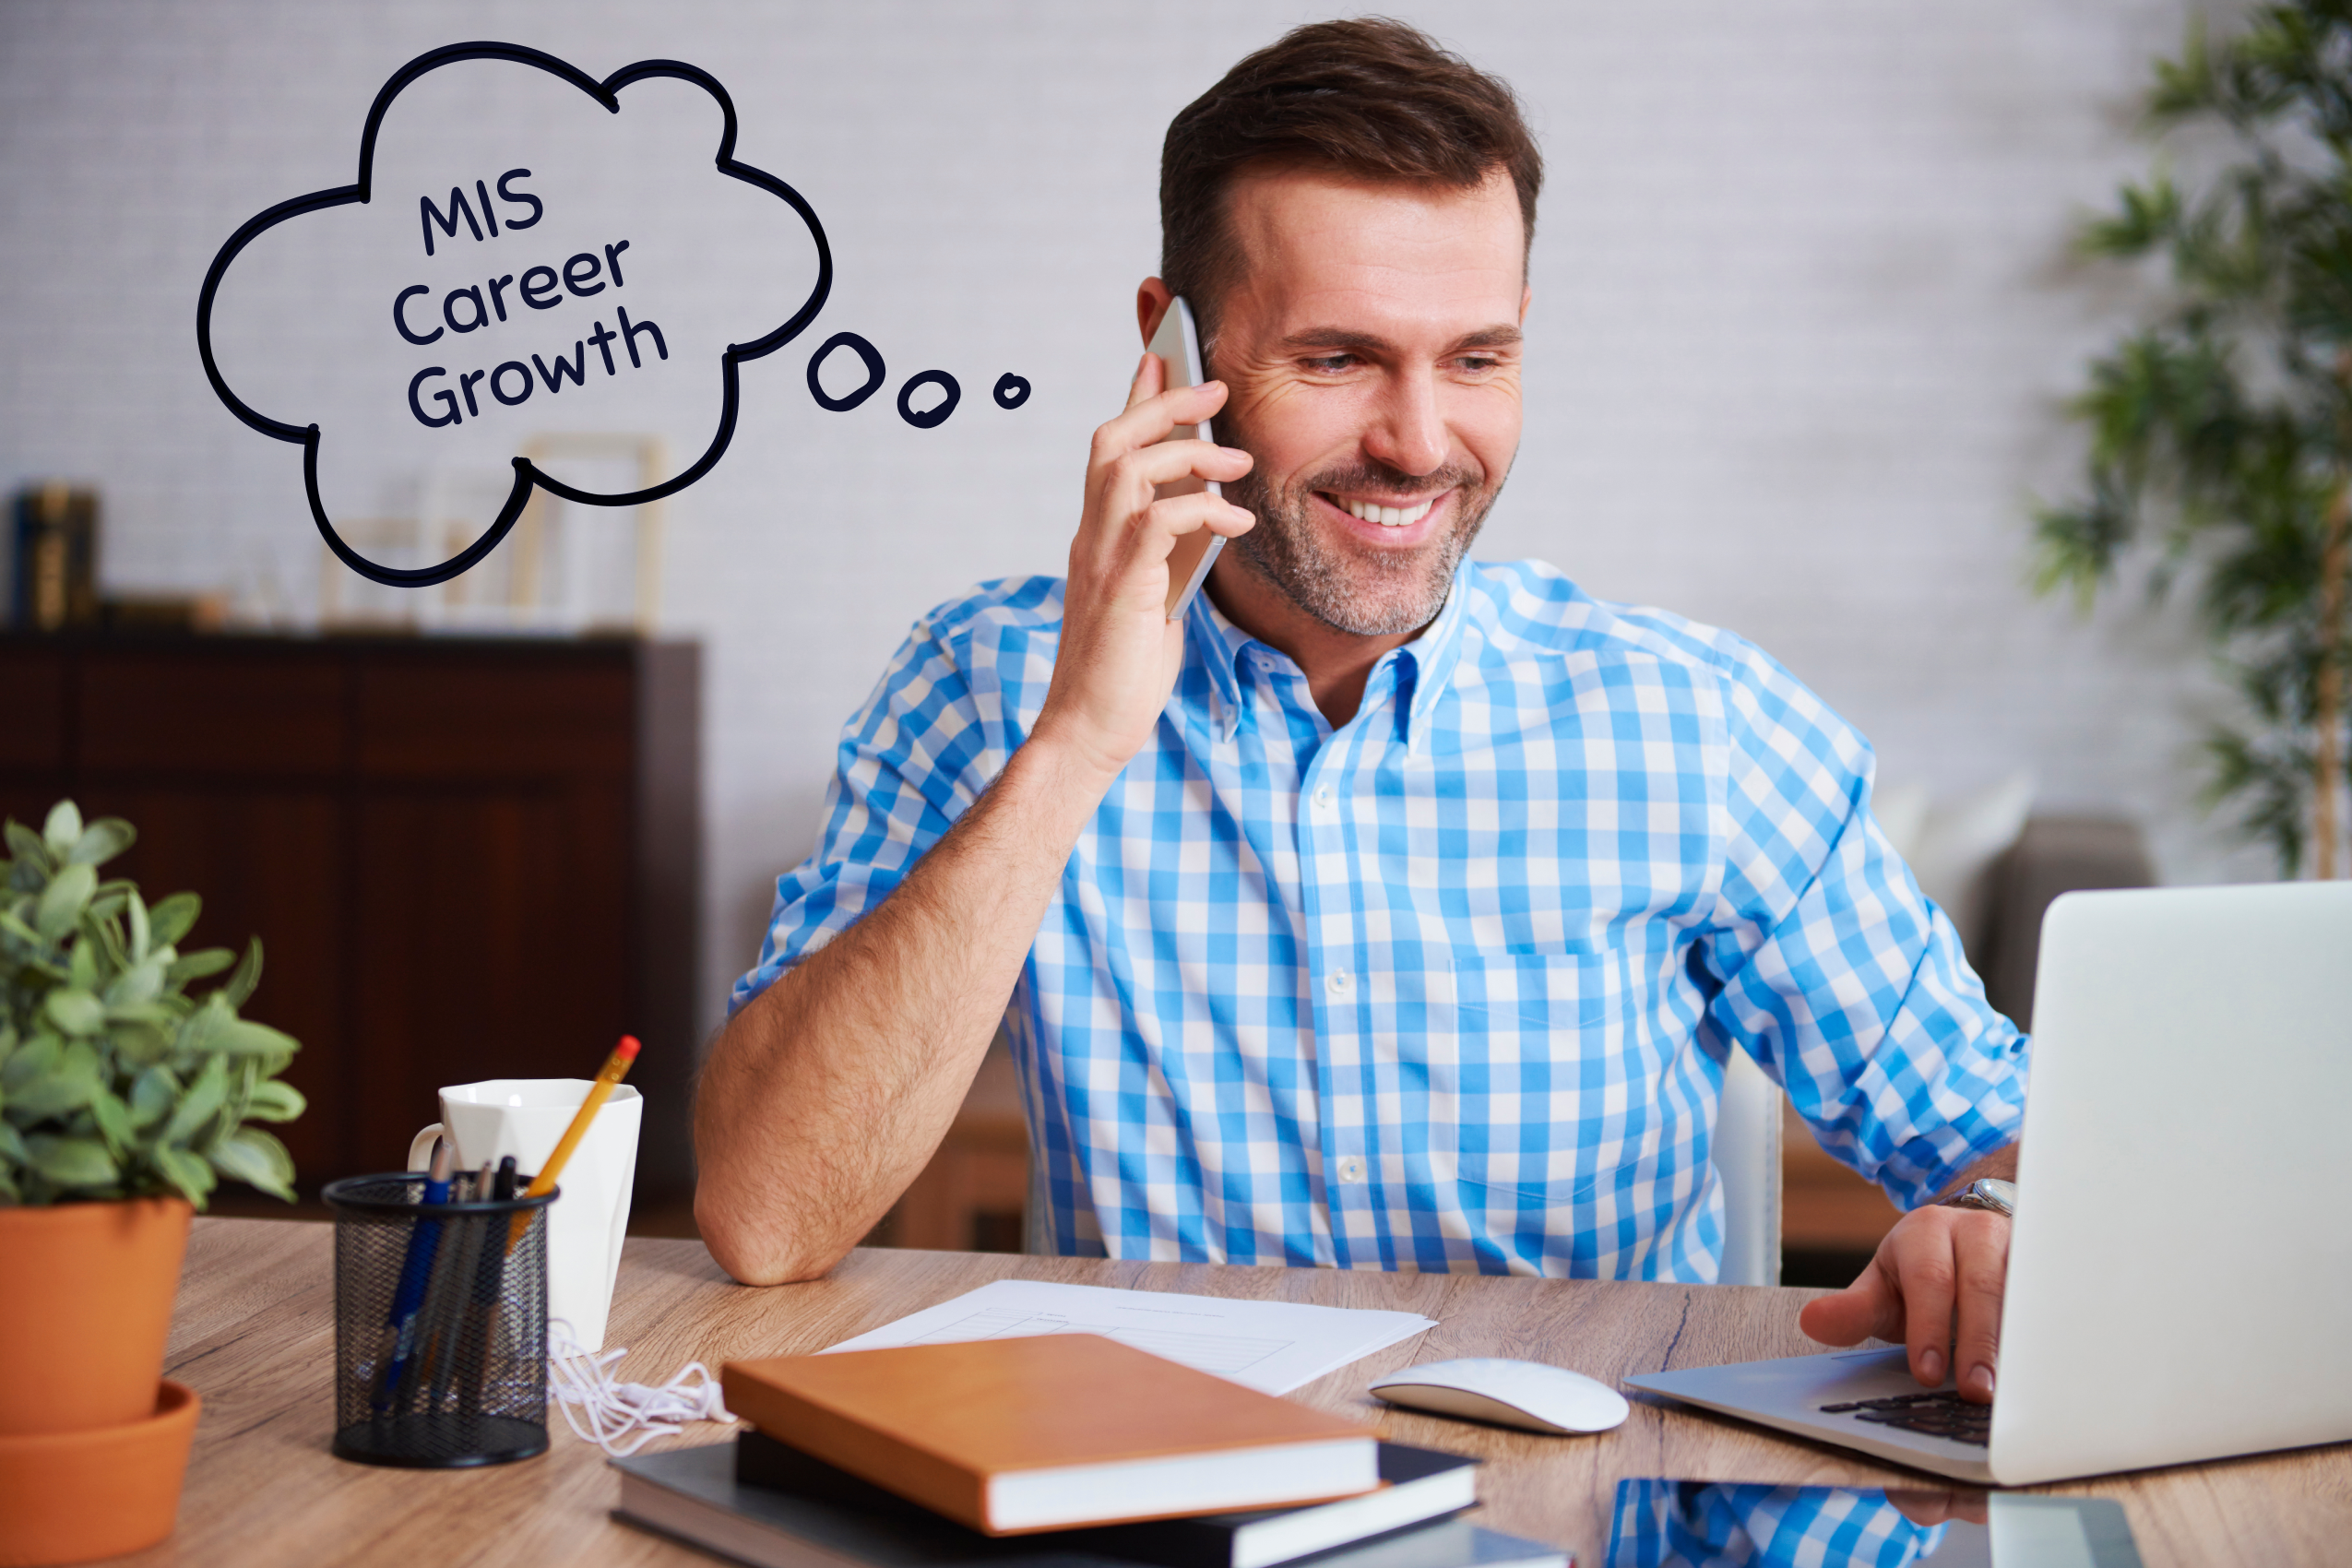 Management Information Systems (MIS) Career Growth